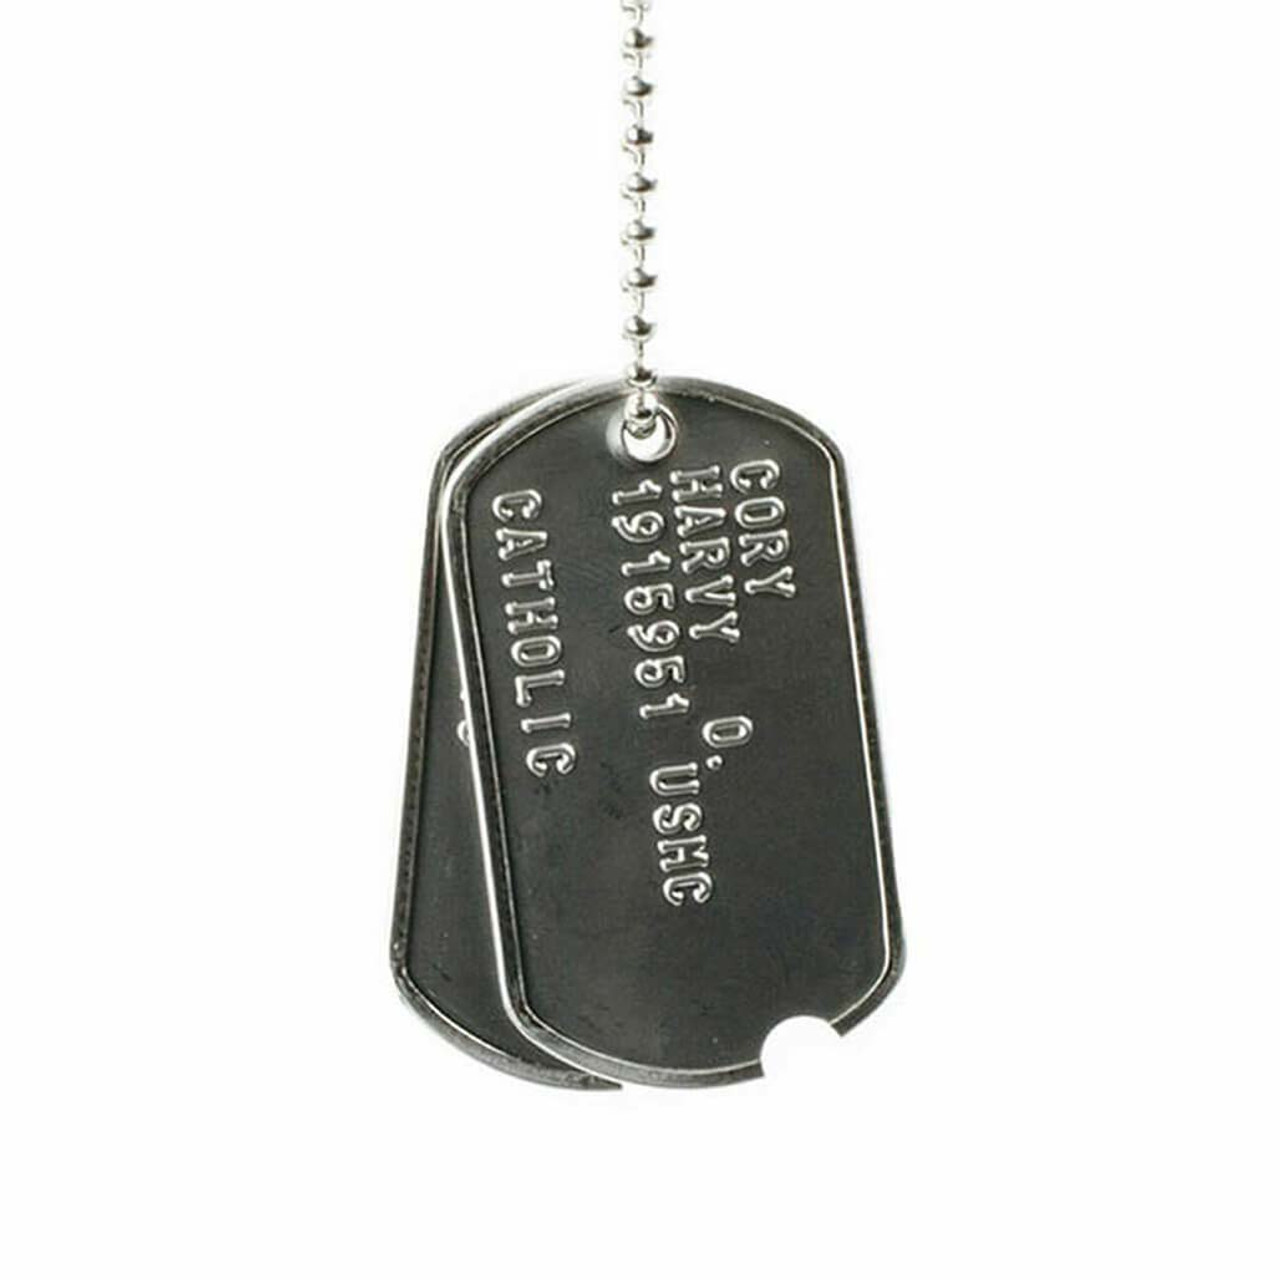 U.S. Army DogTag military status plate necklace/can be customized